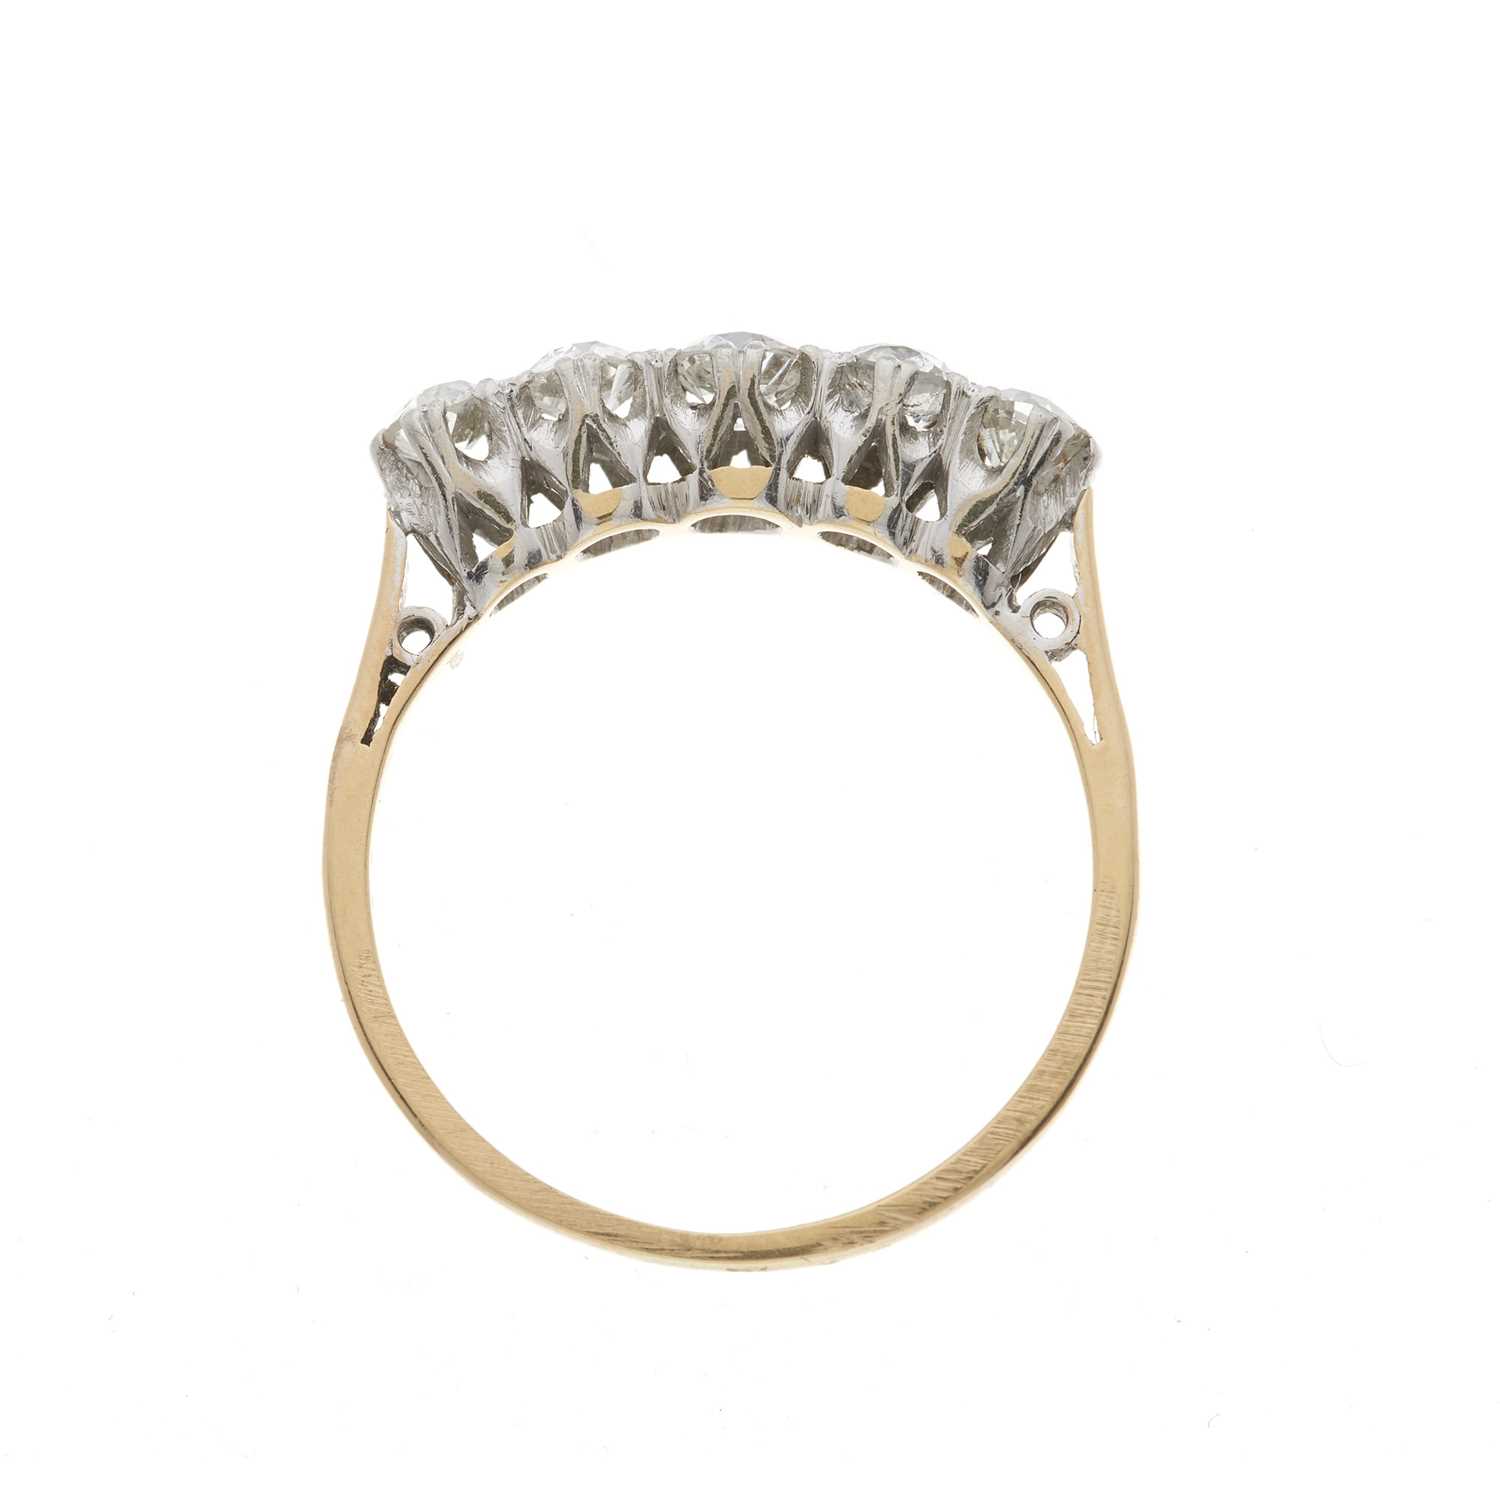 An early 20th century 18ct gold diamond five-stone ring - Image 3 of 3